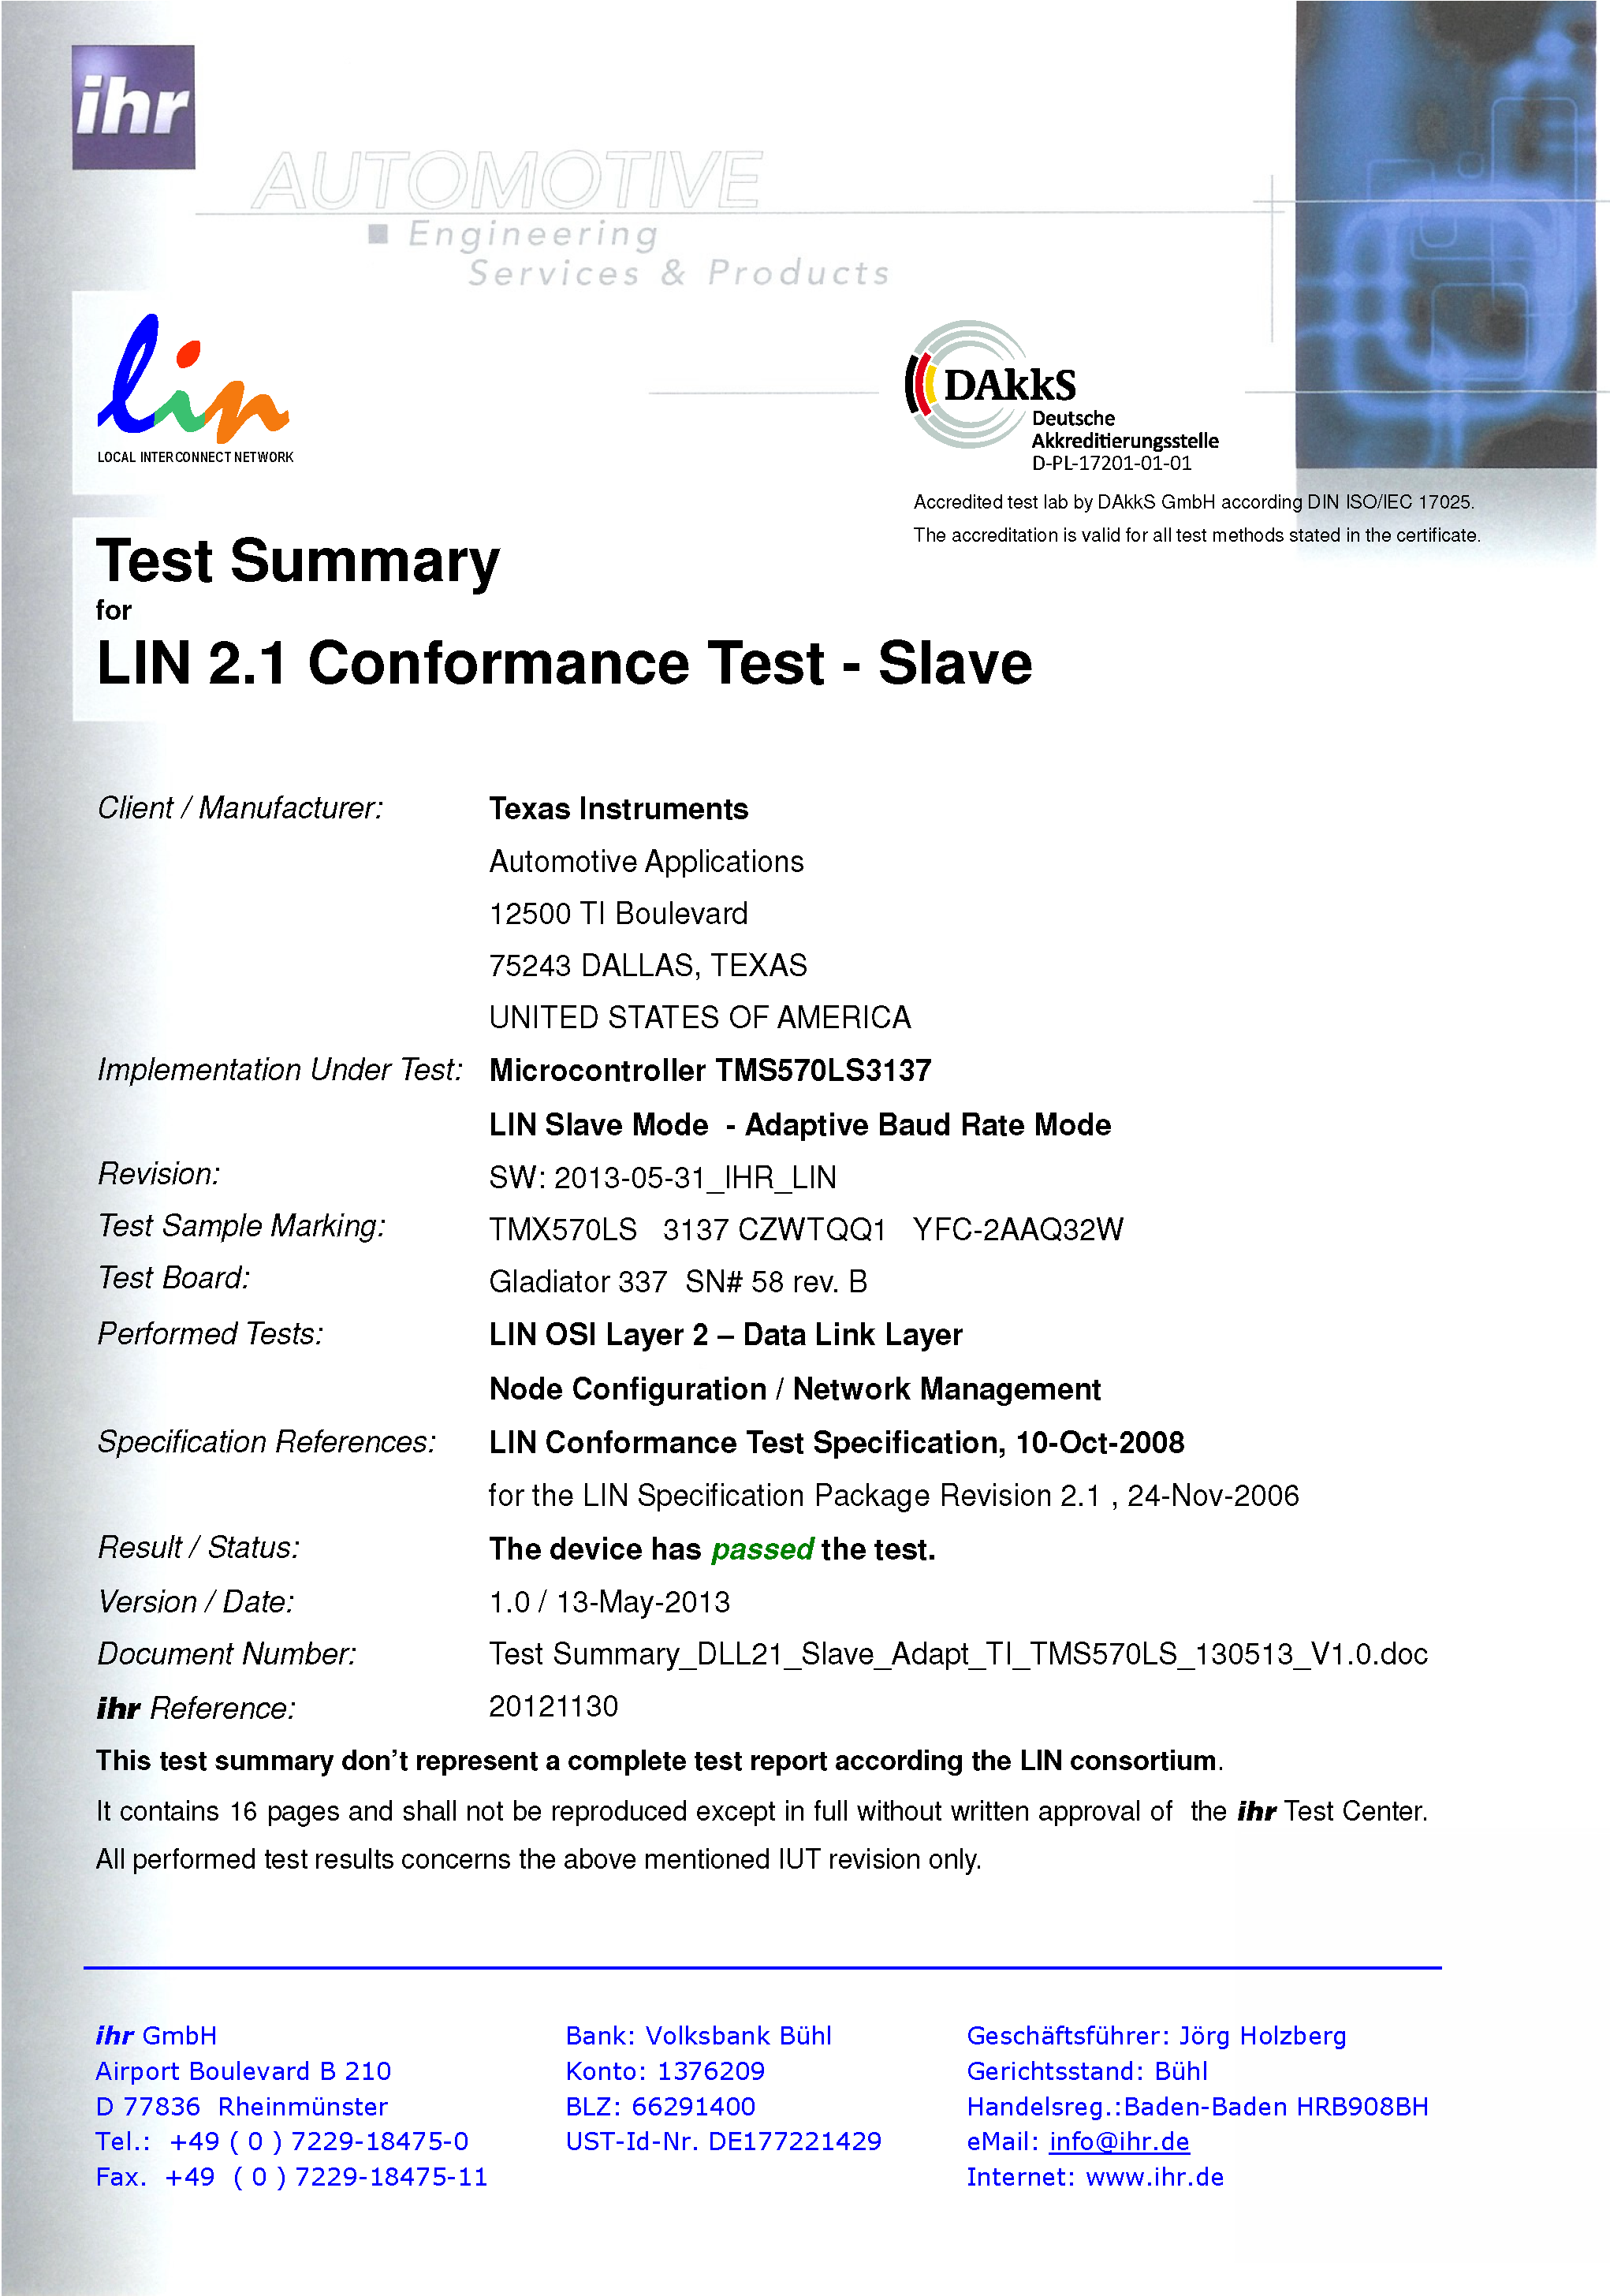 RM48L952 new_LIN_Certification_Slave_Adapt.png